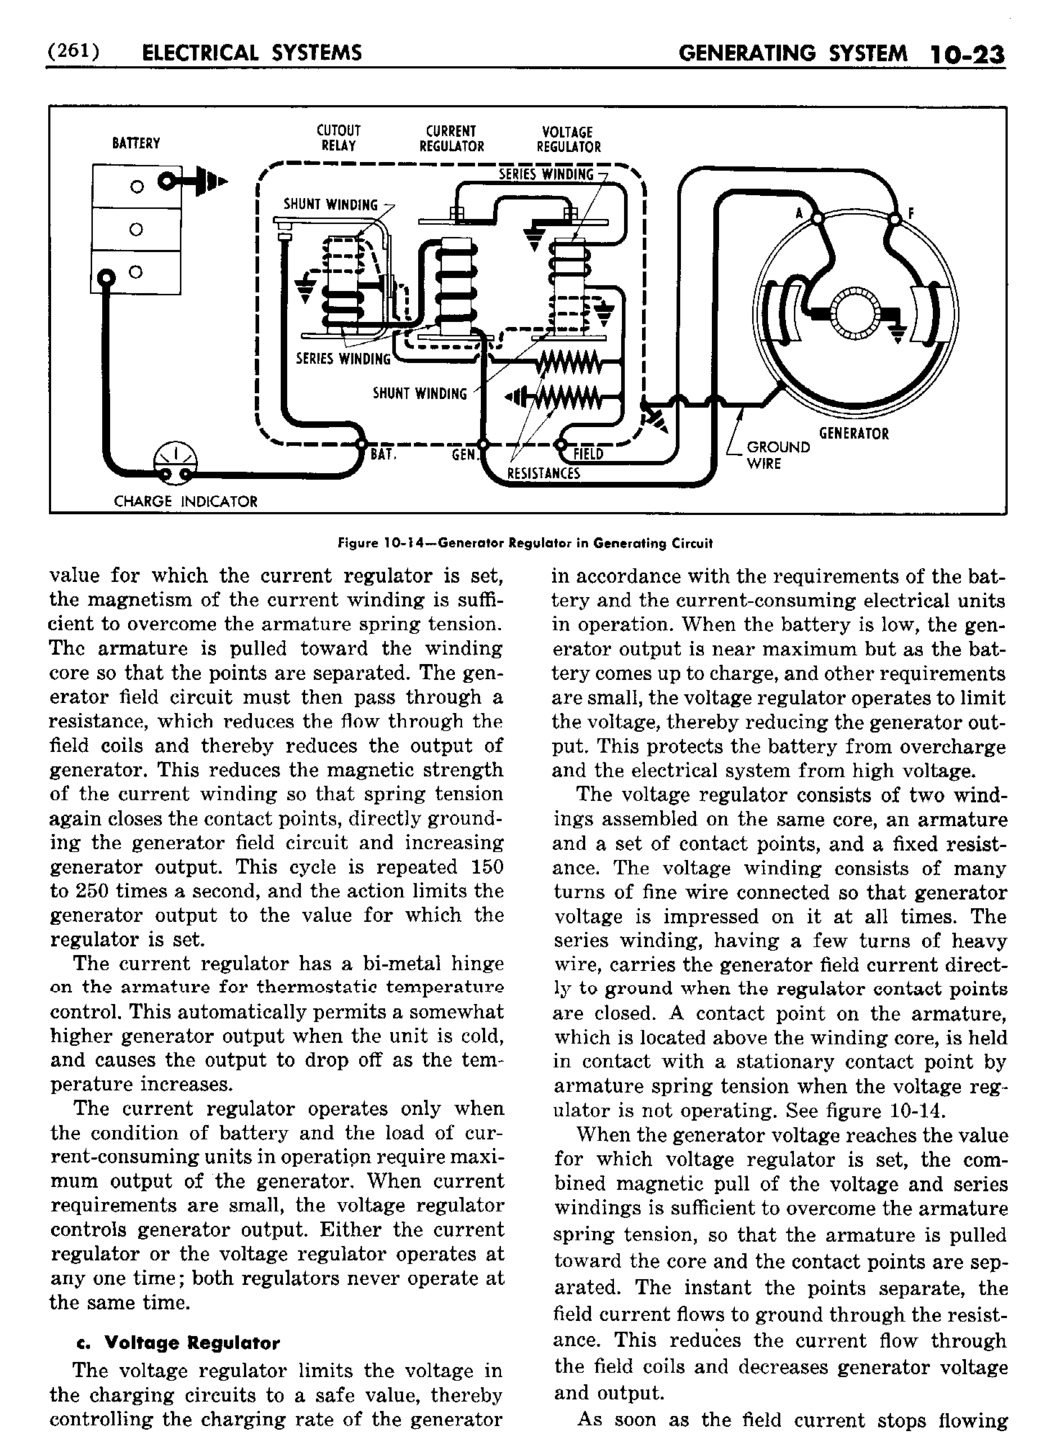 n_11 1950 Buick Shop Manual - Electrical Systems-023-023.jpg